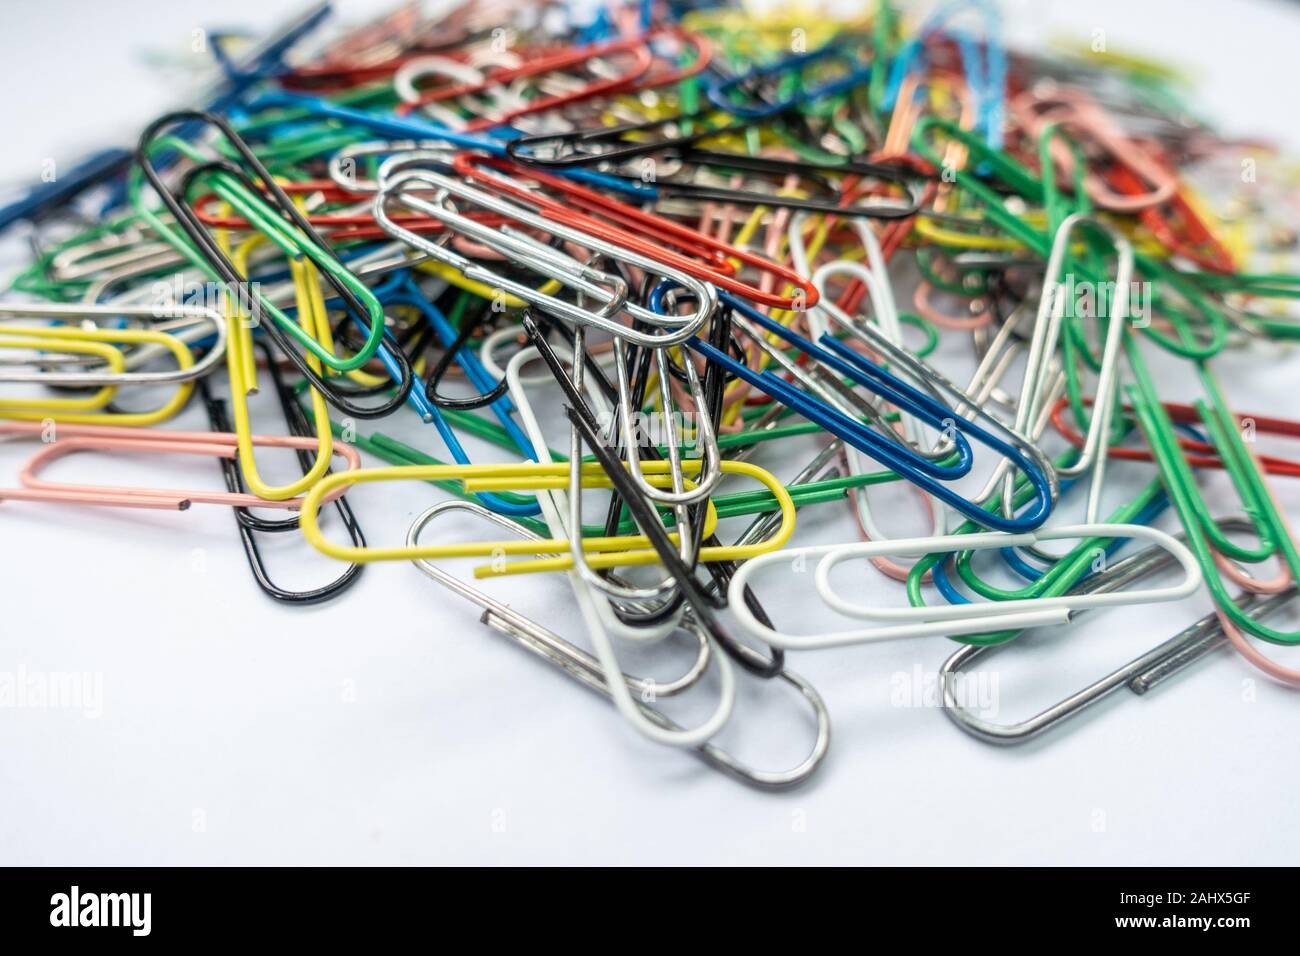 A pile of paper clips against a white background. Stock Photo